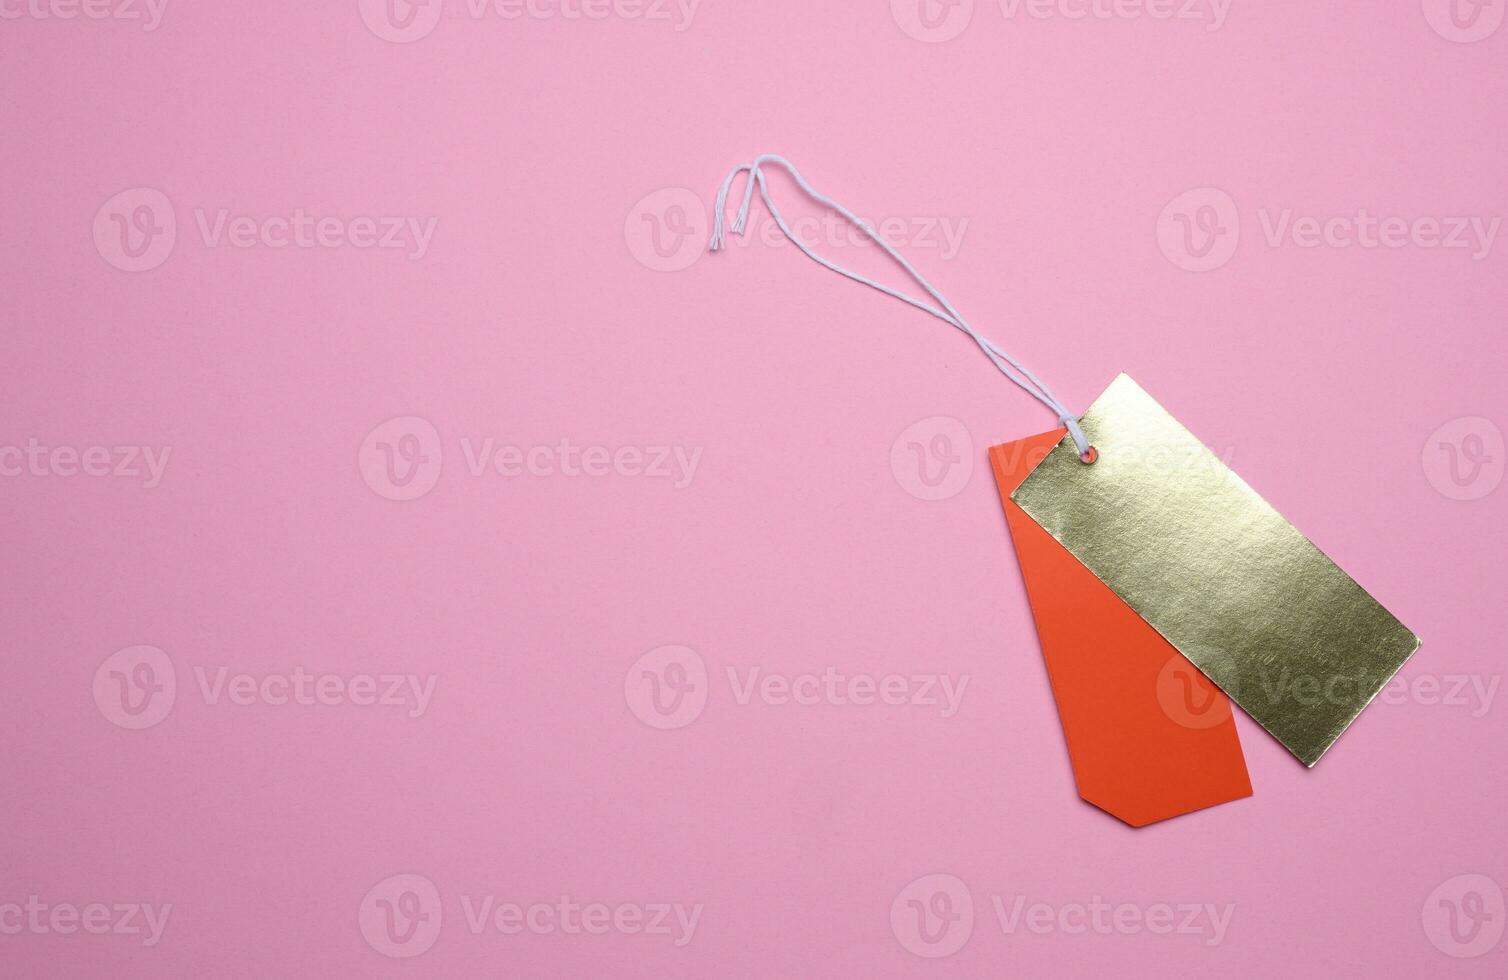 Price tag with a white string for clothing and merchandise on a pink background. Copy space photo